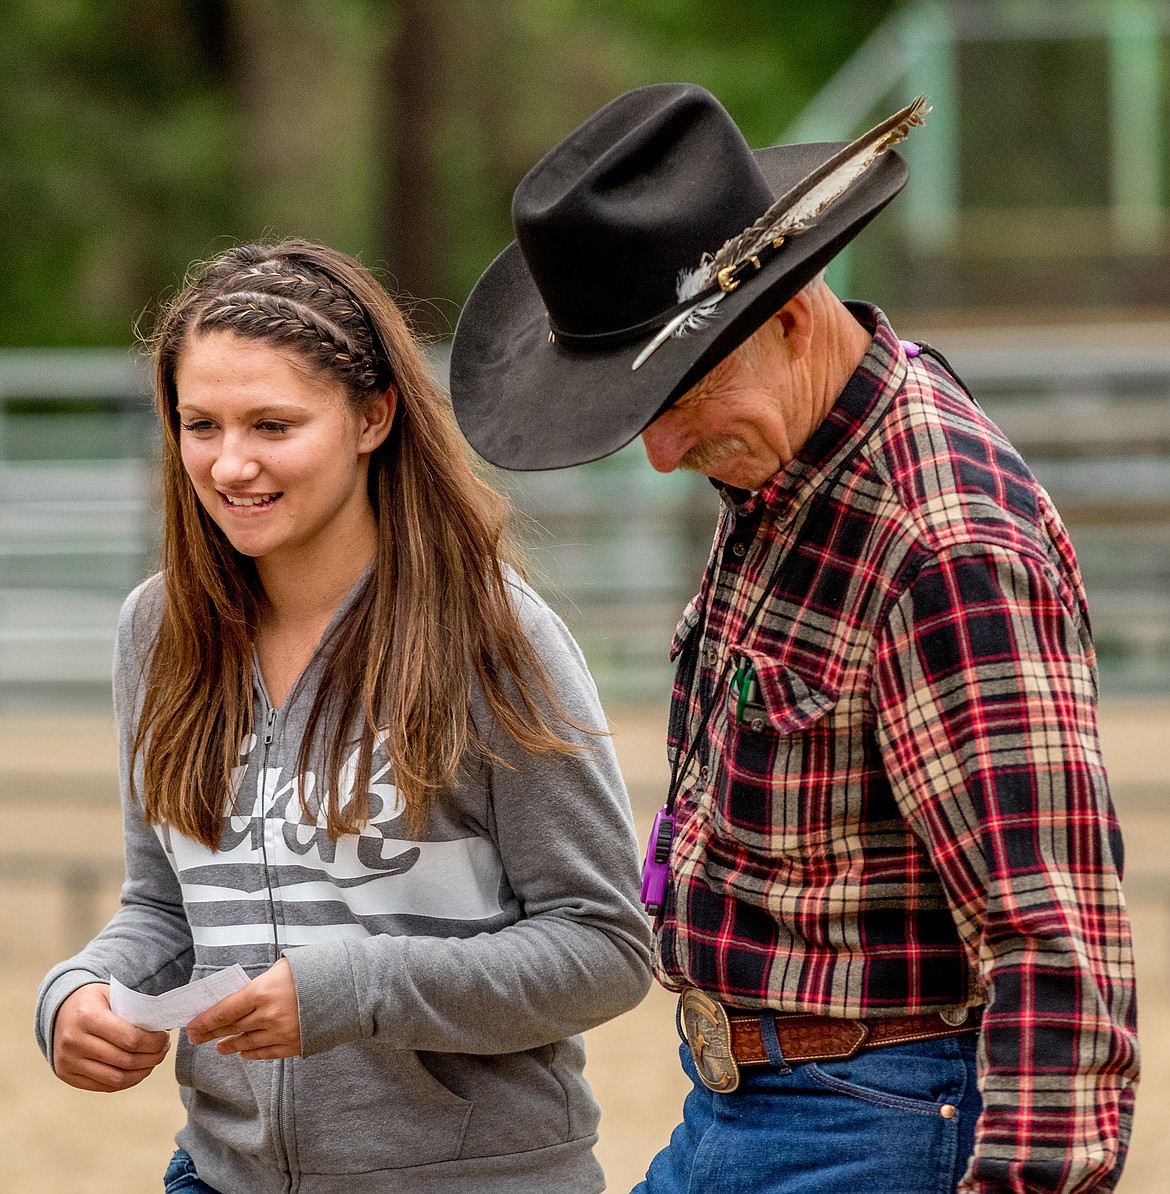 Libby High School graduate Haylee Cannon, left, was presented with a $1,000 scholarship by Incredi-Bull committee chairman Brett Bronson, right, during Saturday night's event at J. Neils Park in Libby. (John Blodgett/The Western News)